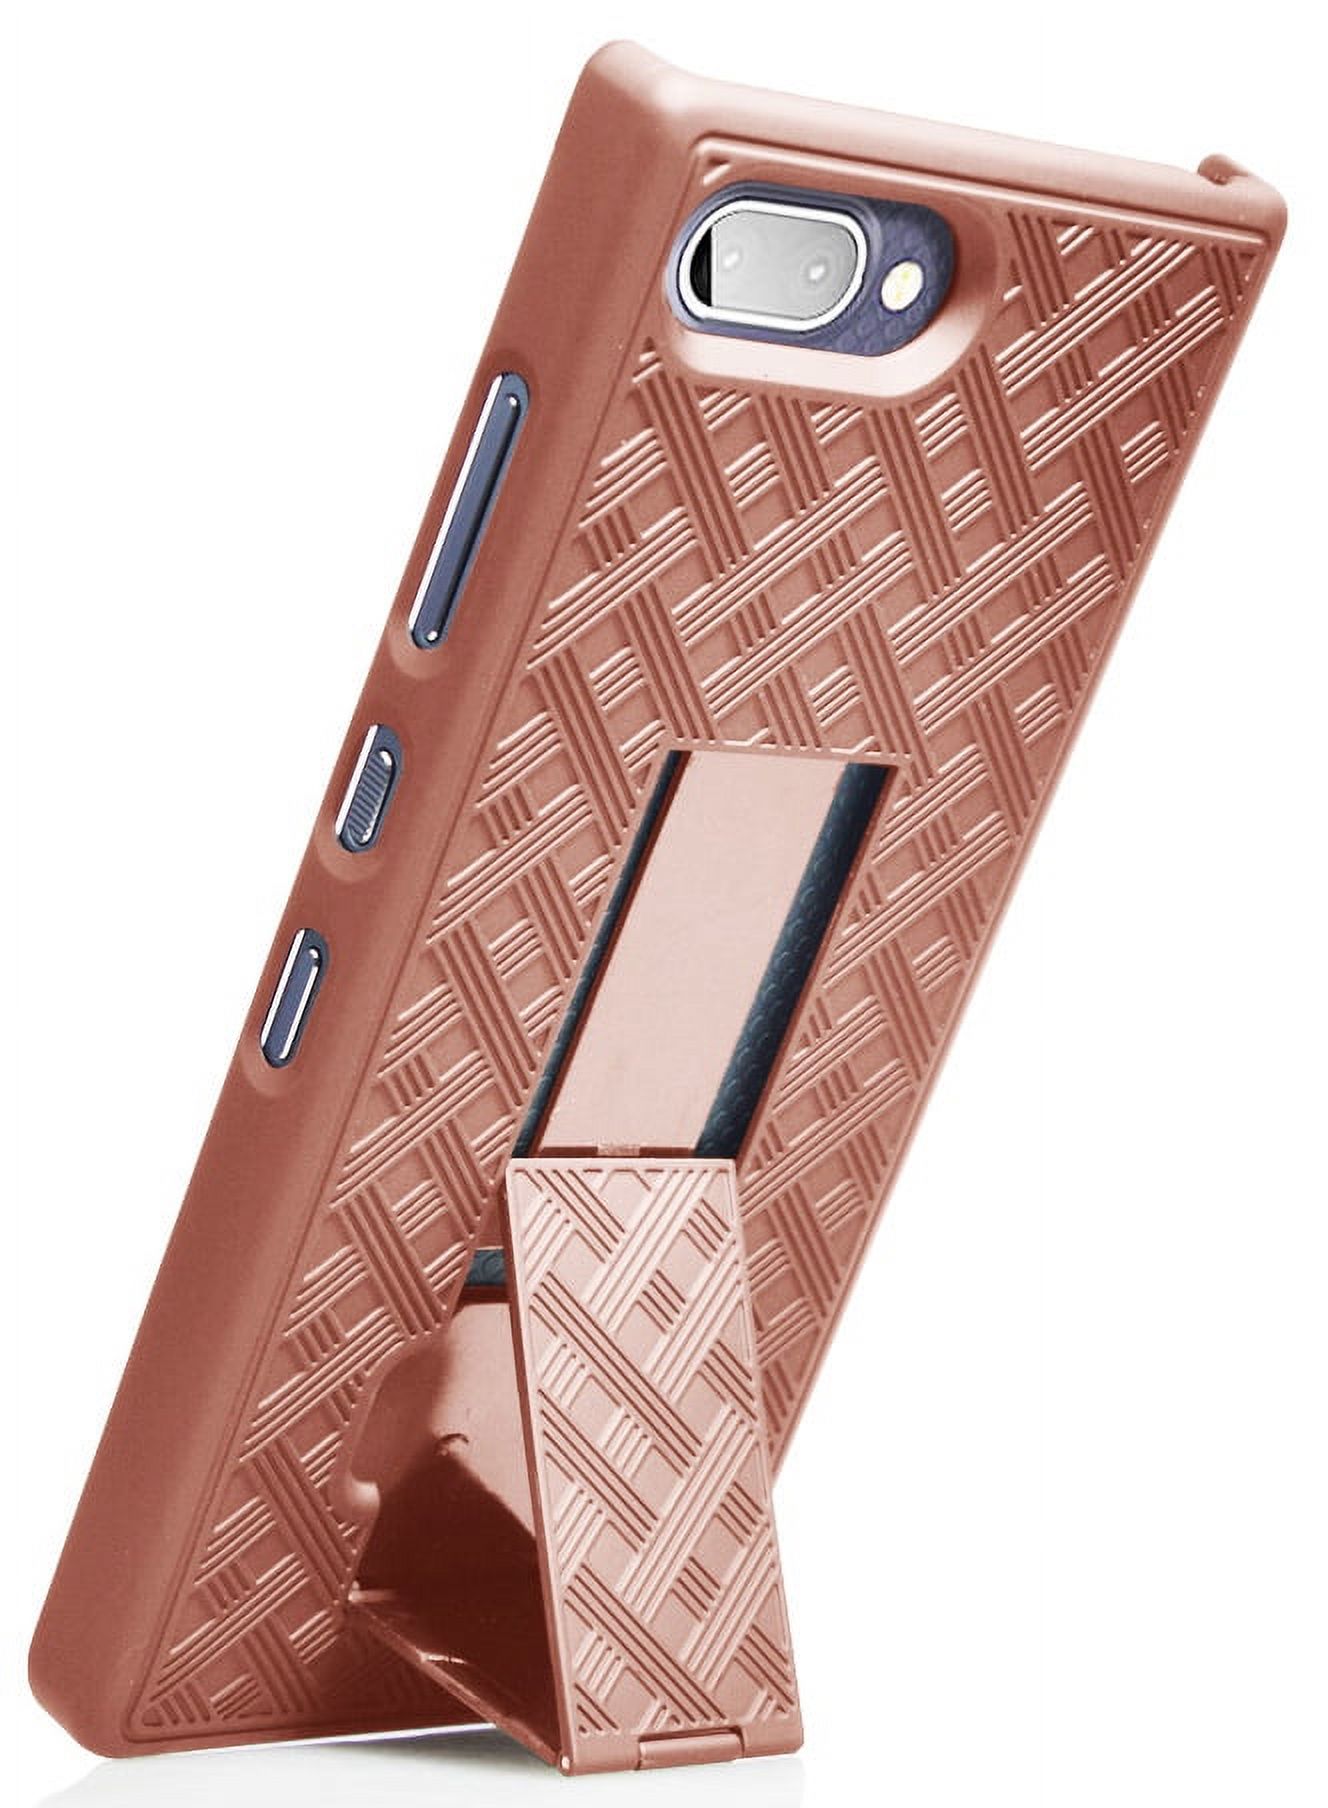 Case for BlackBerry Key2 LE, Nakedcellphone [Rose Gold Pink] Slim Ribbed Hard Shell Cover [with Kickstand] for BlackBerry Key2 LE Phone [ONLY LE MODEL] BBE100-1, BBE100-2, BBE100-4, BBE100-5 - image 2 of 7